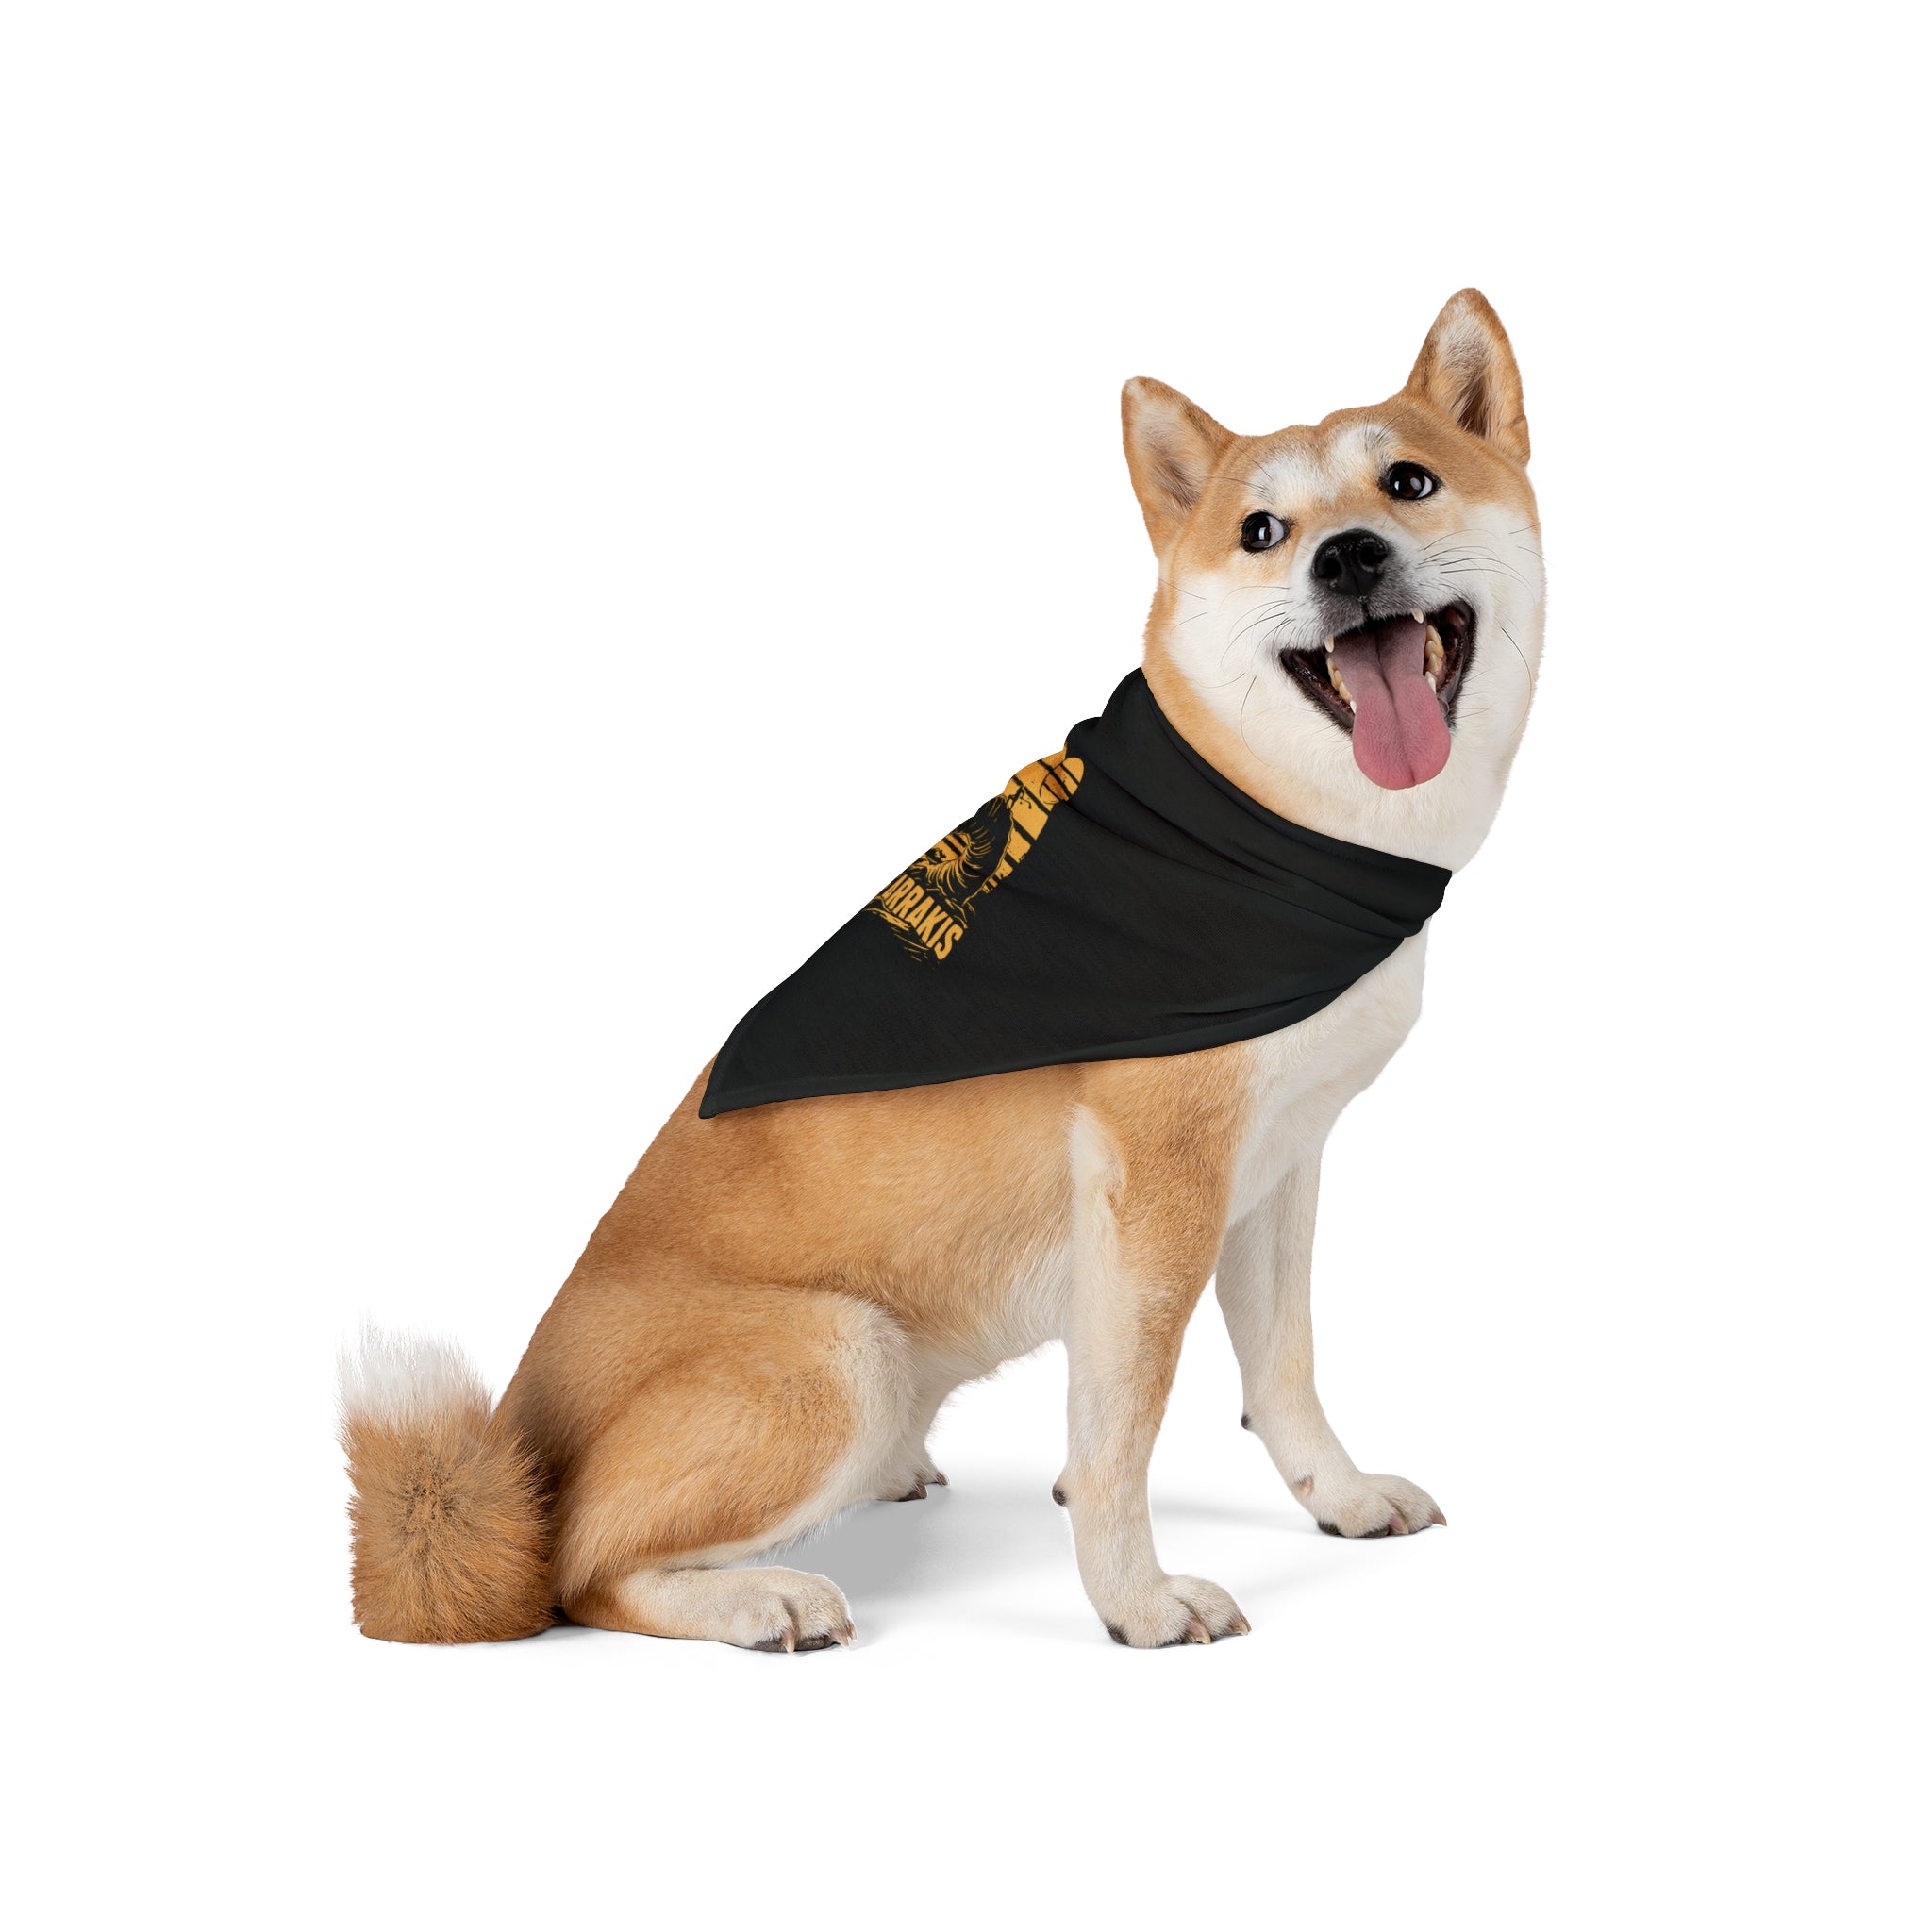 A Shiba Inu dog wearing a Surf Arrakis - Pet Bandana made of comfy polyester sits with its mouth open and tongue out.